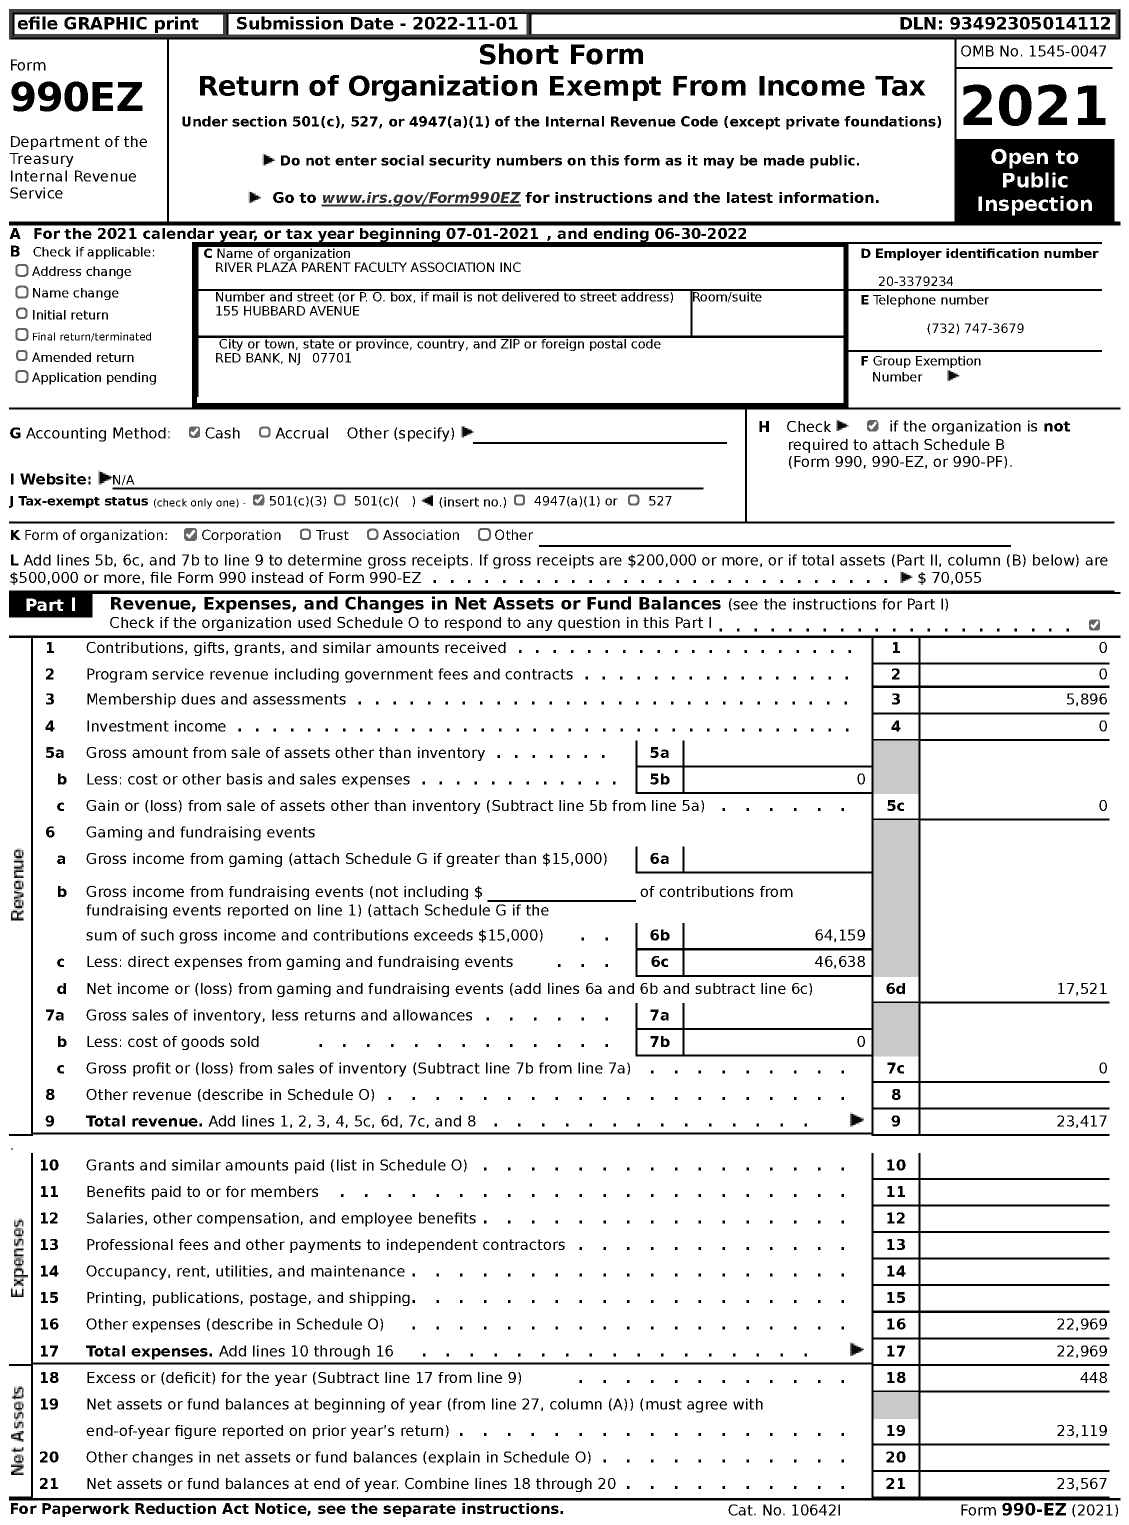 Image of first page of 2021 Form 990EZ for River Plaza Parent Faculty Association